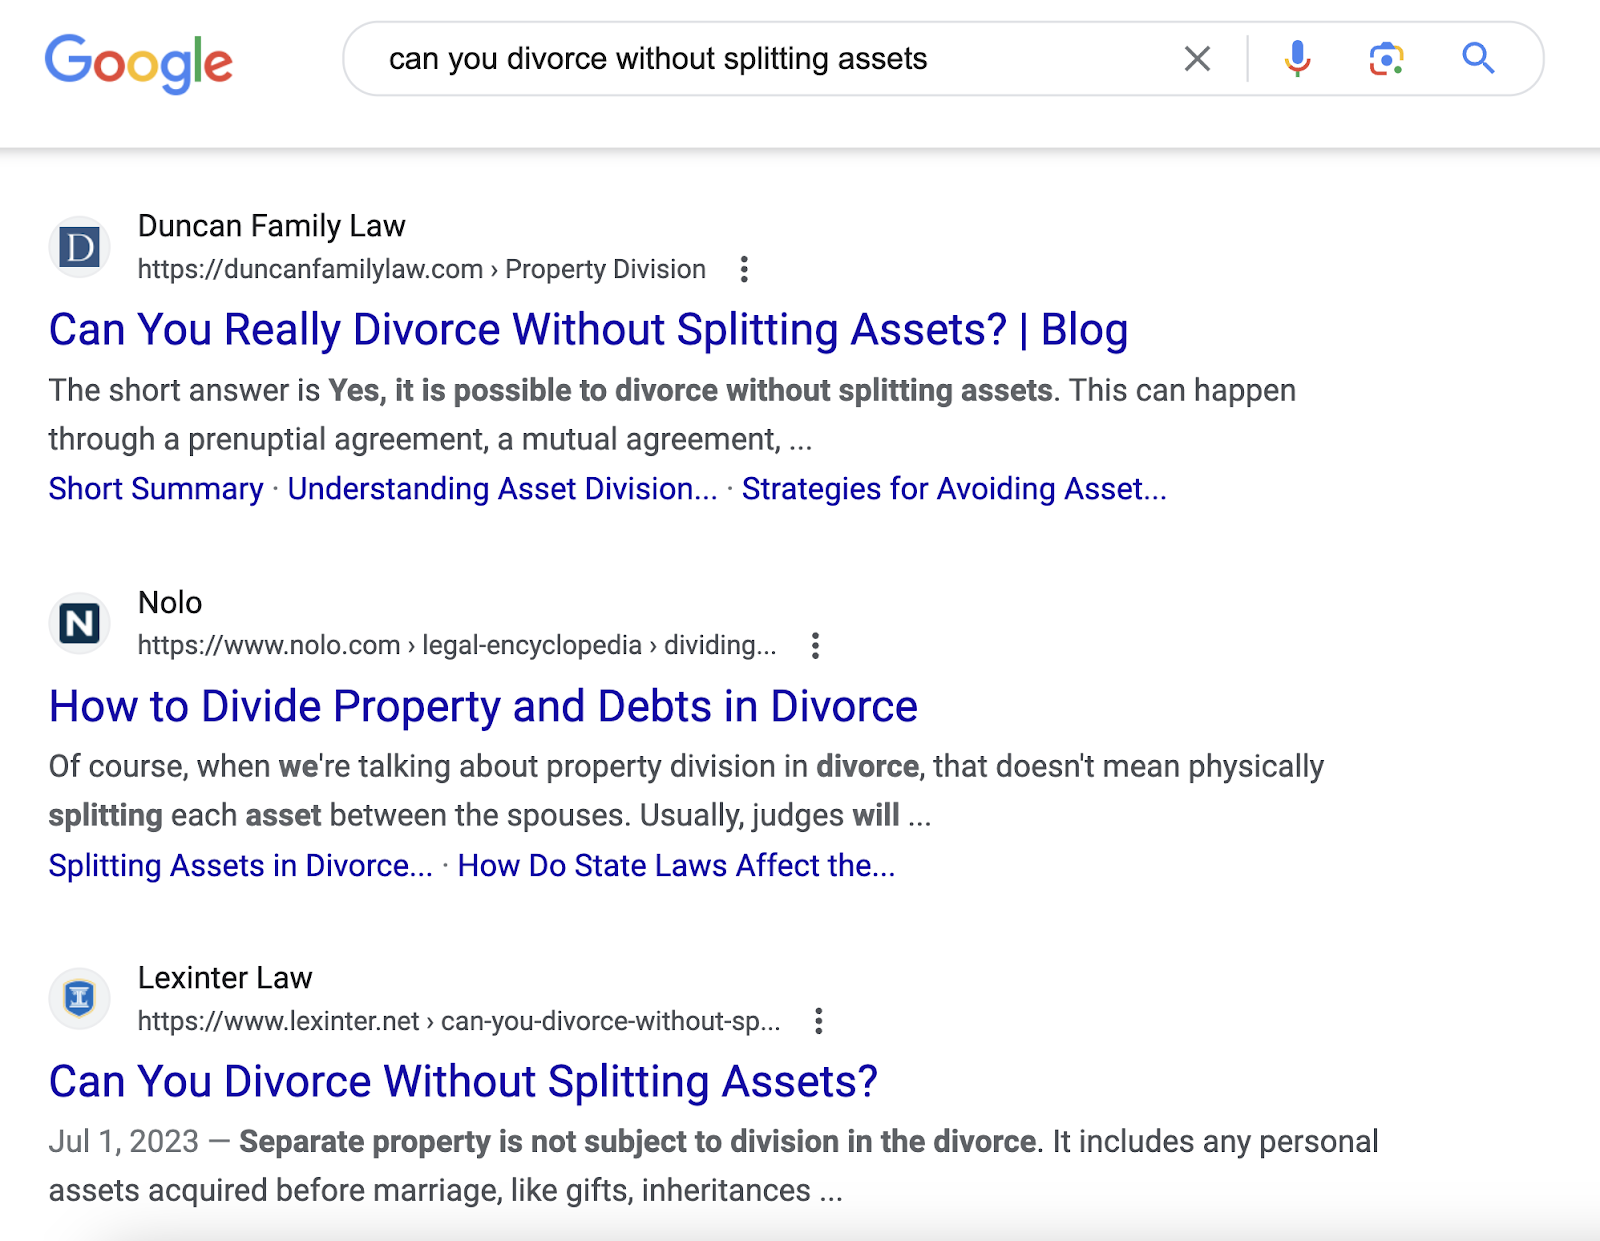 Google's SERP for “can you divorcement  without splitting assets” query